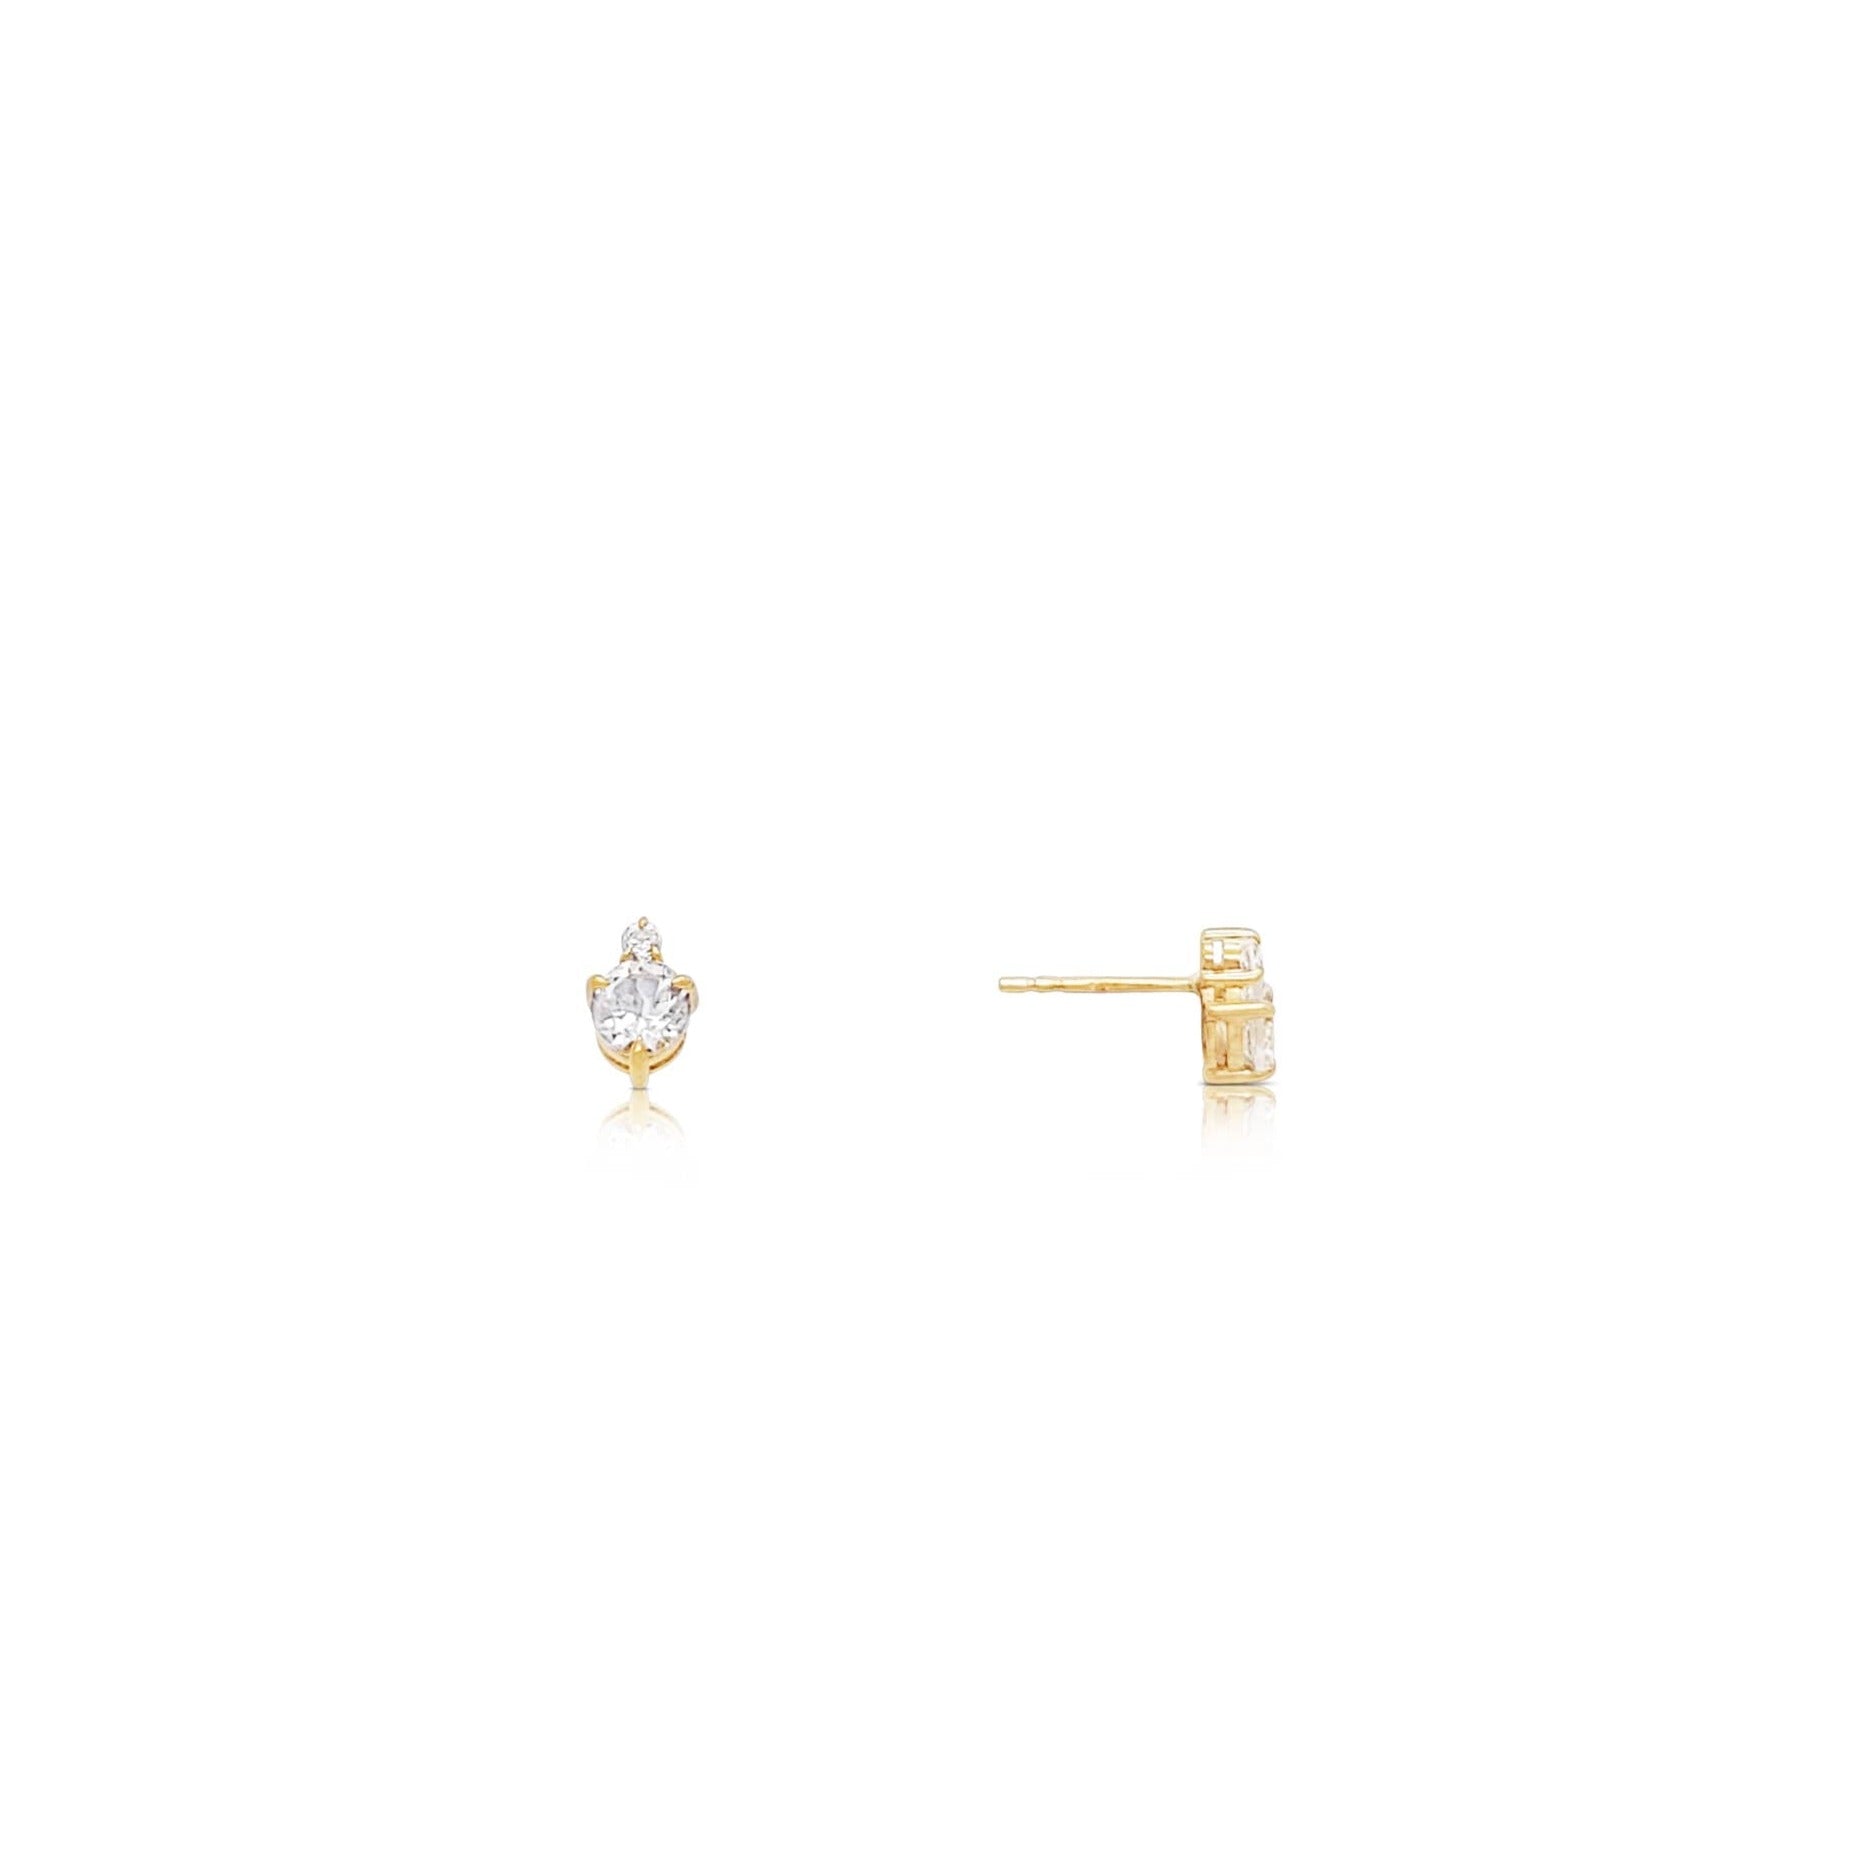 The Birthstone Collection Earrings